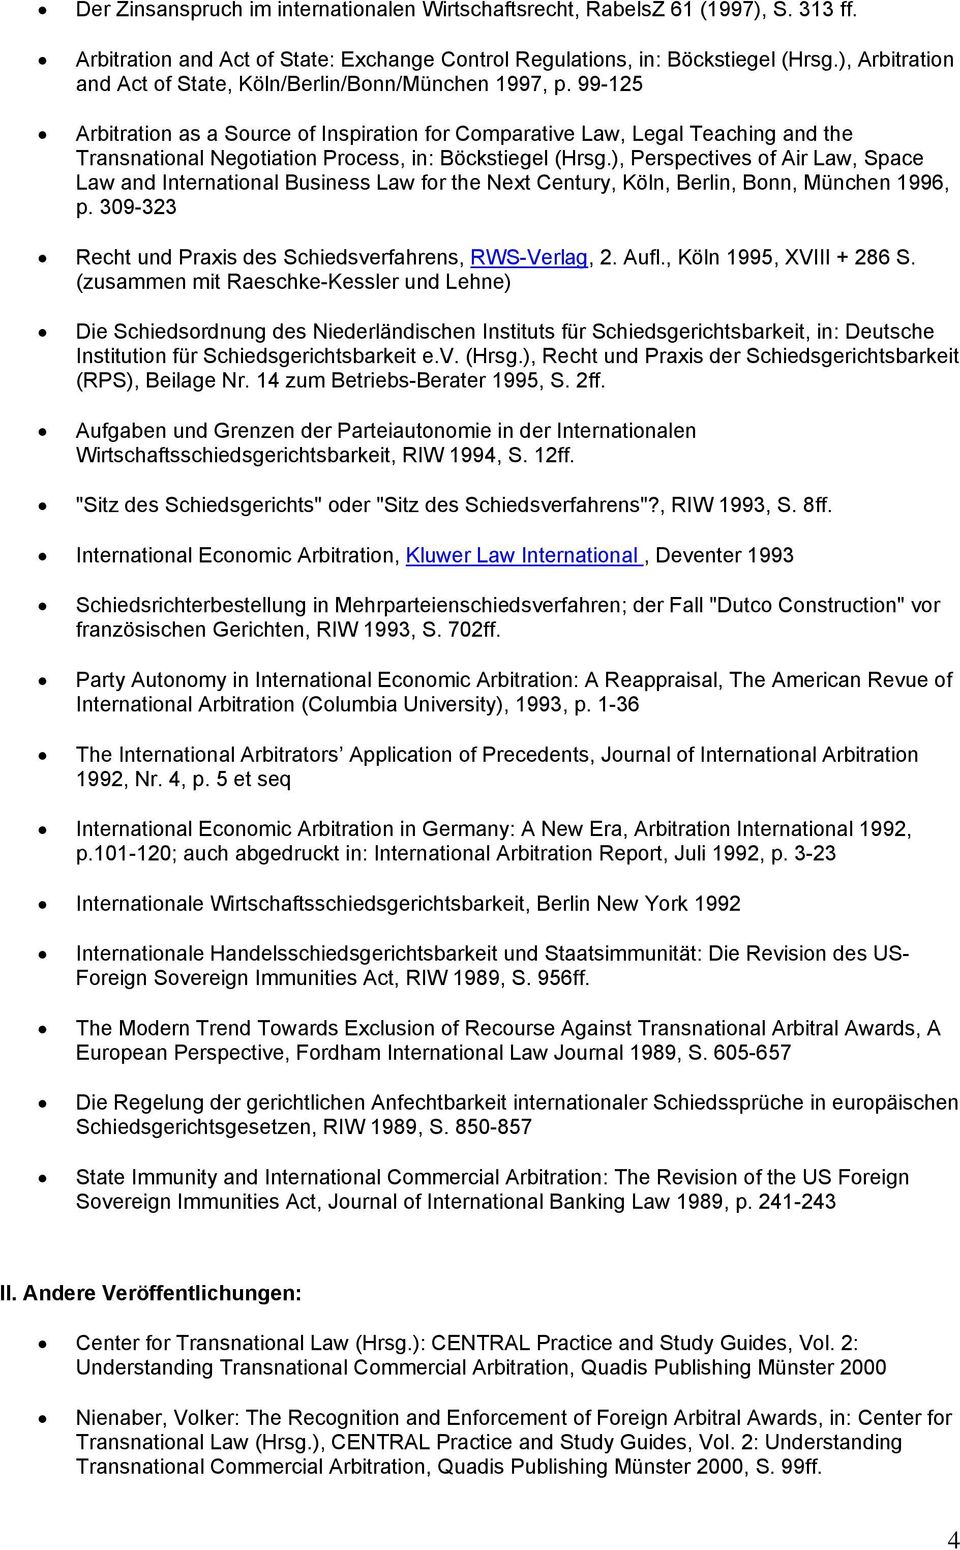 99-125 Arbitration as a Source of Inspiration for Comparative Law, Legal Teaching and the Transnational Negotiation Process, in: Böckstiegel (Hrsg.